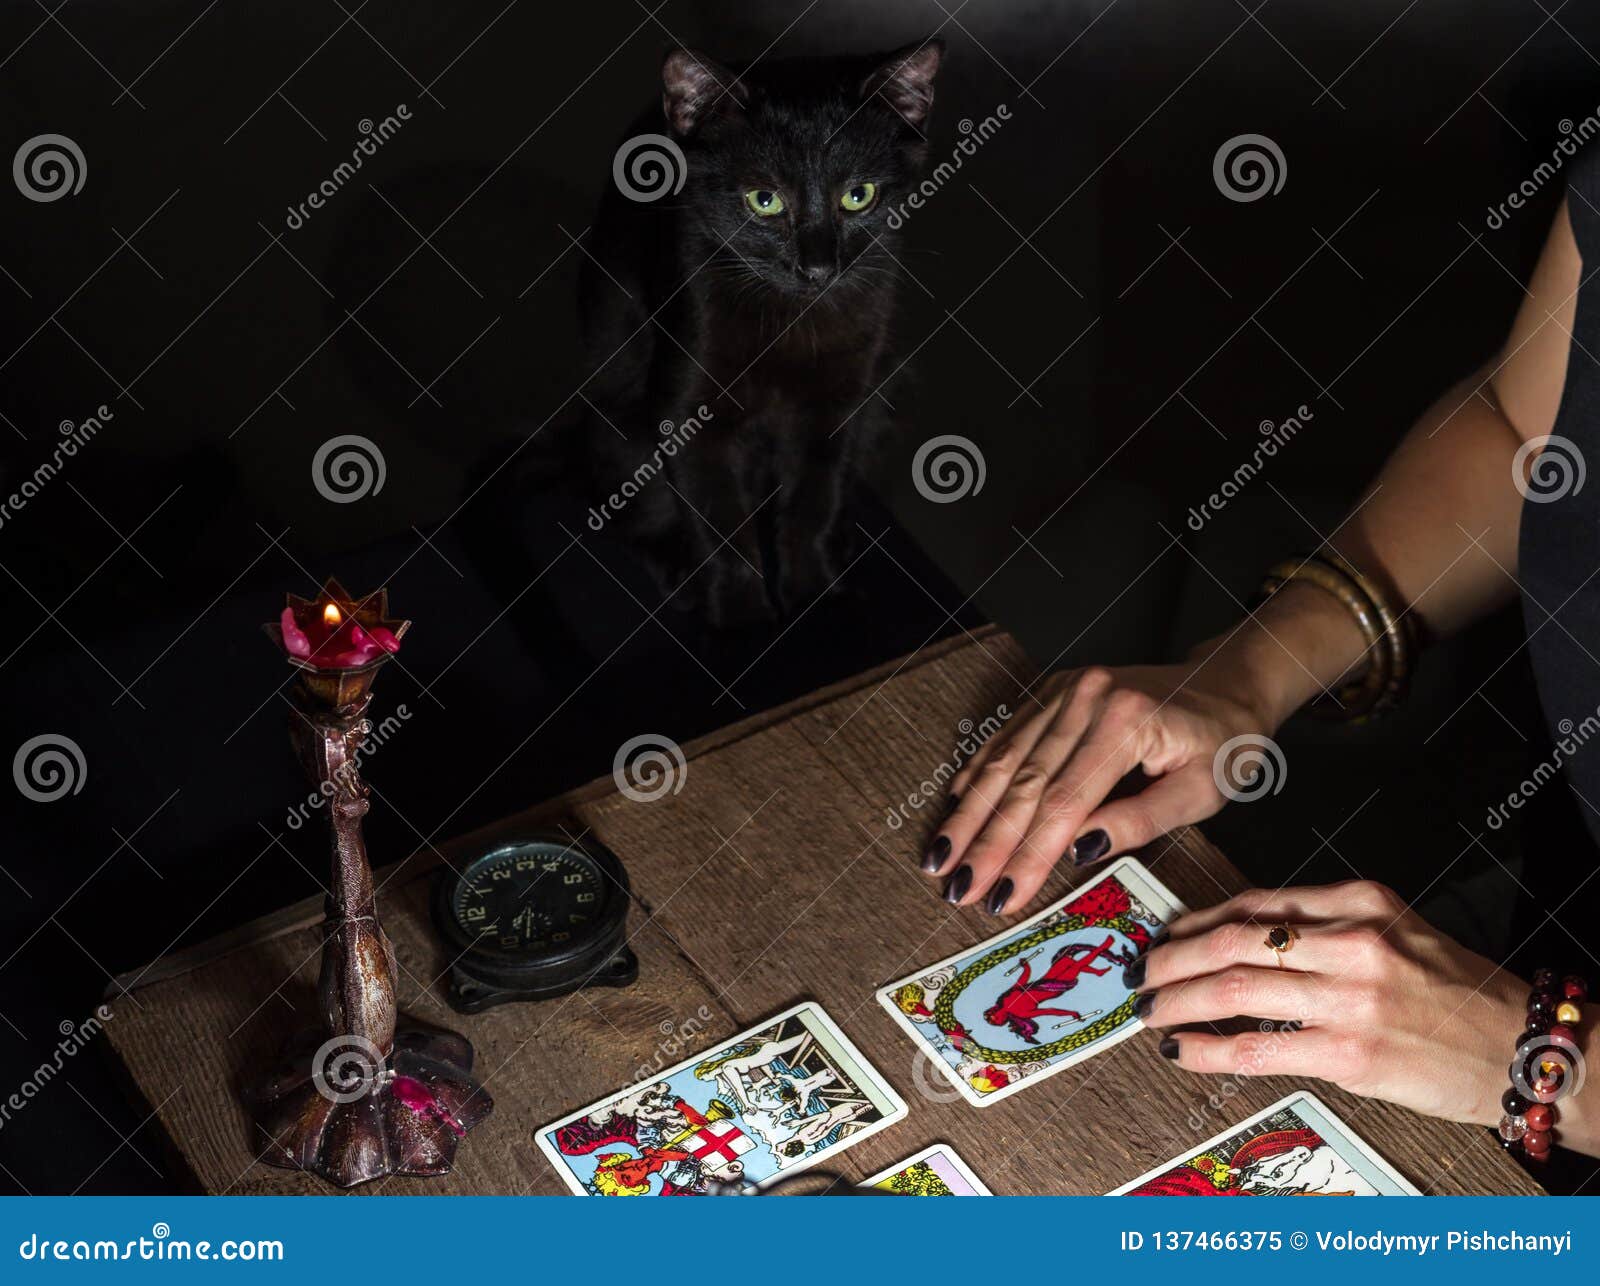 The Fortune Teller Lays Out On A Wooden Table The Tarot Cards By The Light Of A Lantern And A ...